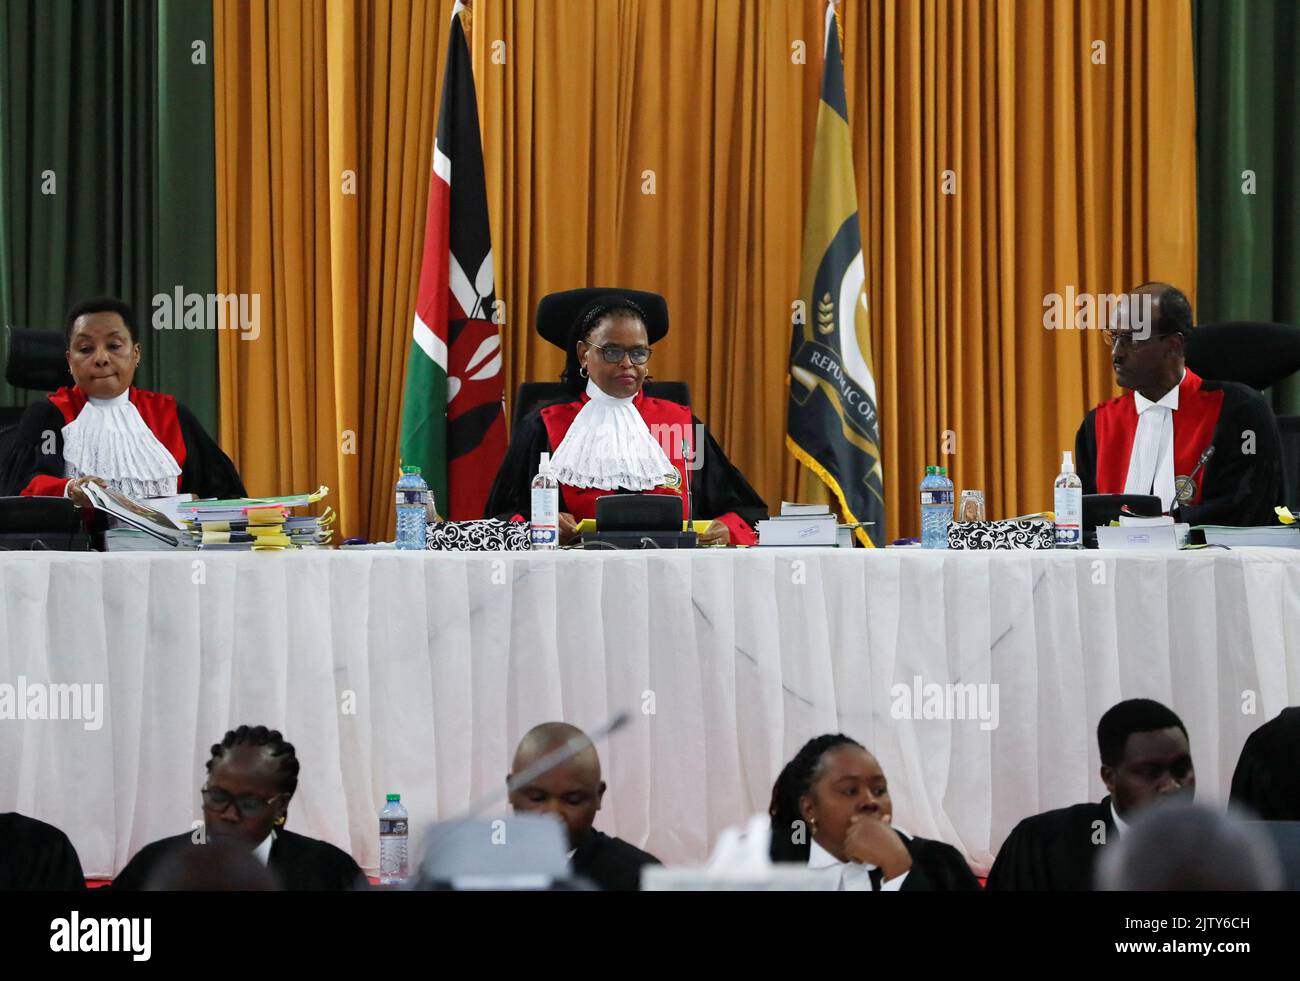 Kenya's Supreme Court judges led by Chief Justice Martha Koome flanked by her deputy, Philomena Mwilu and Supreme Court judge Mohammed Ibrahim attend the final hearing day over a petition seeking to invalidate the outcome of the recent presidential election, at the Supreme Court in Nairobi, Kenya September 2, 2022. REUTERS/Thomas Mukoya Stock Photo